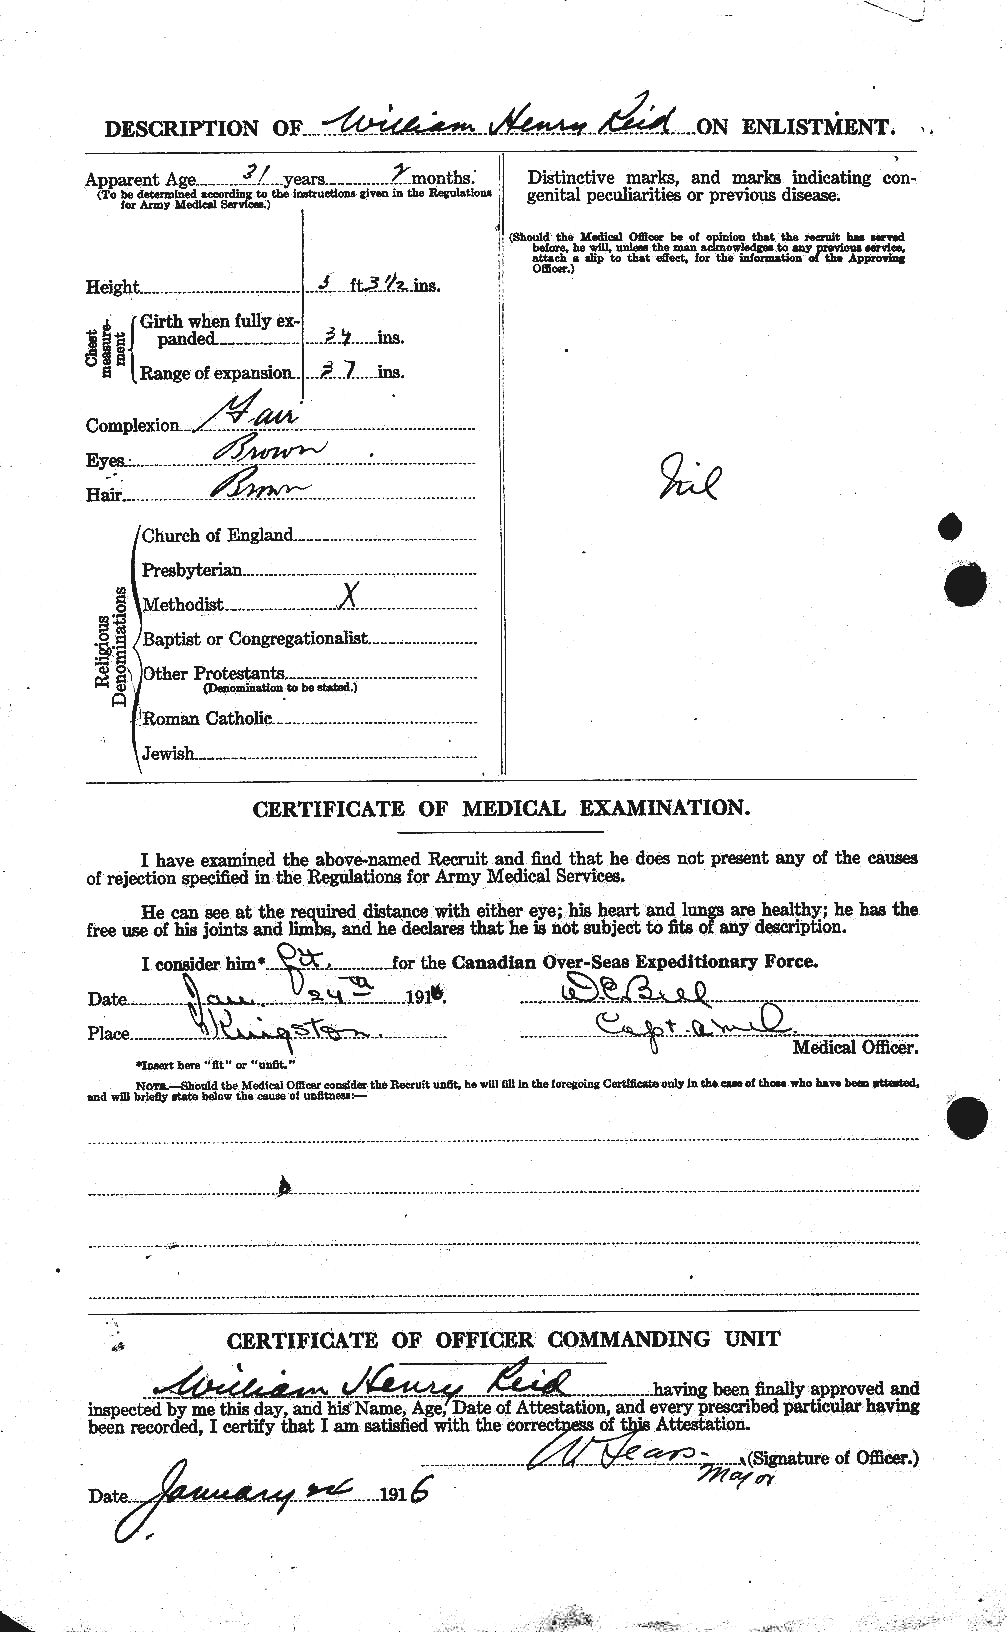 Personnel Records of the First World War - CEF 596995b